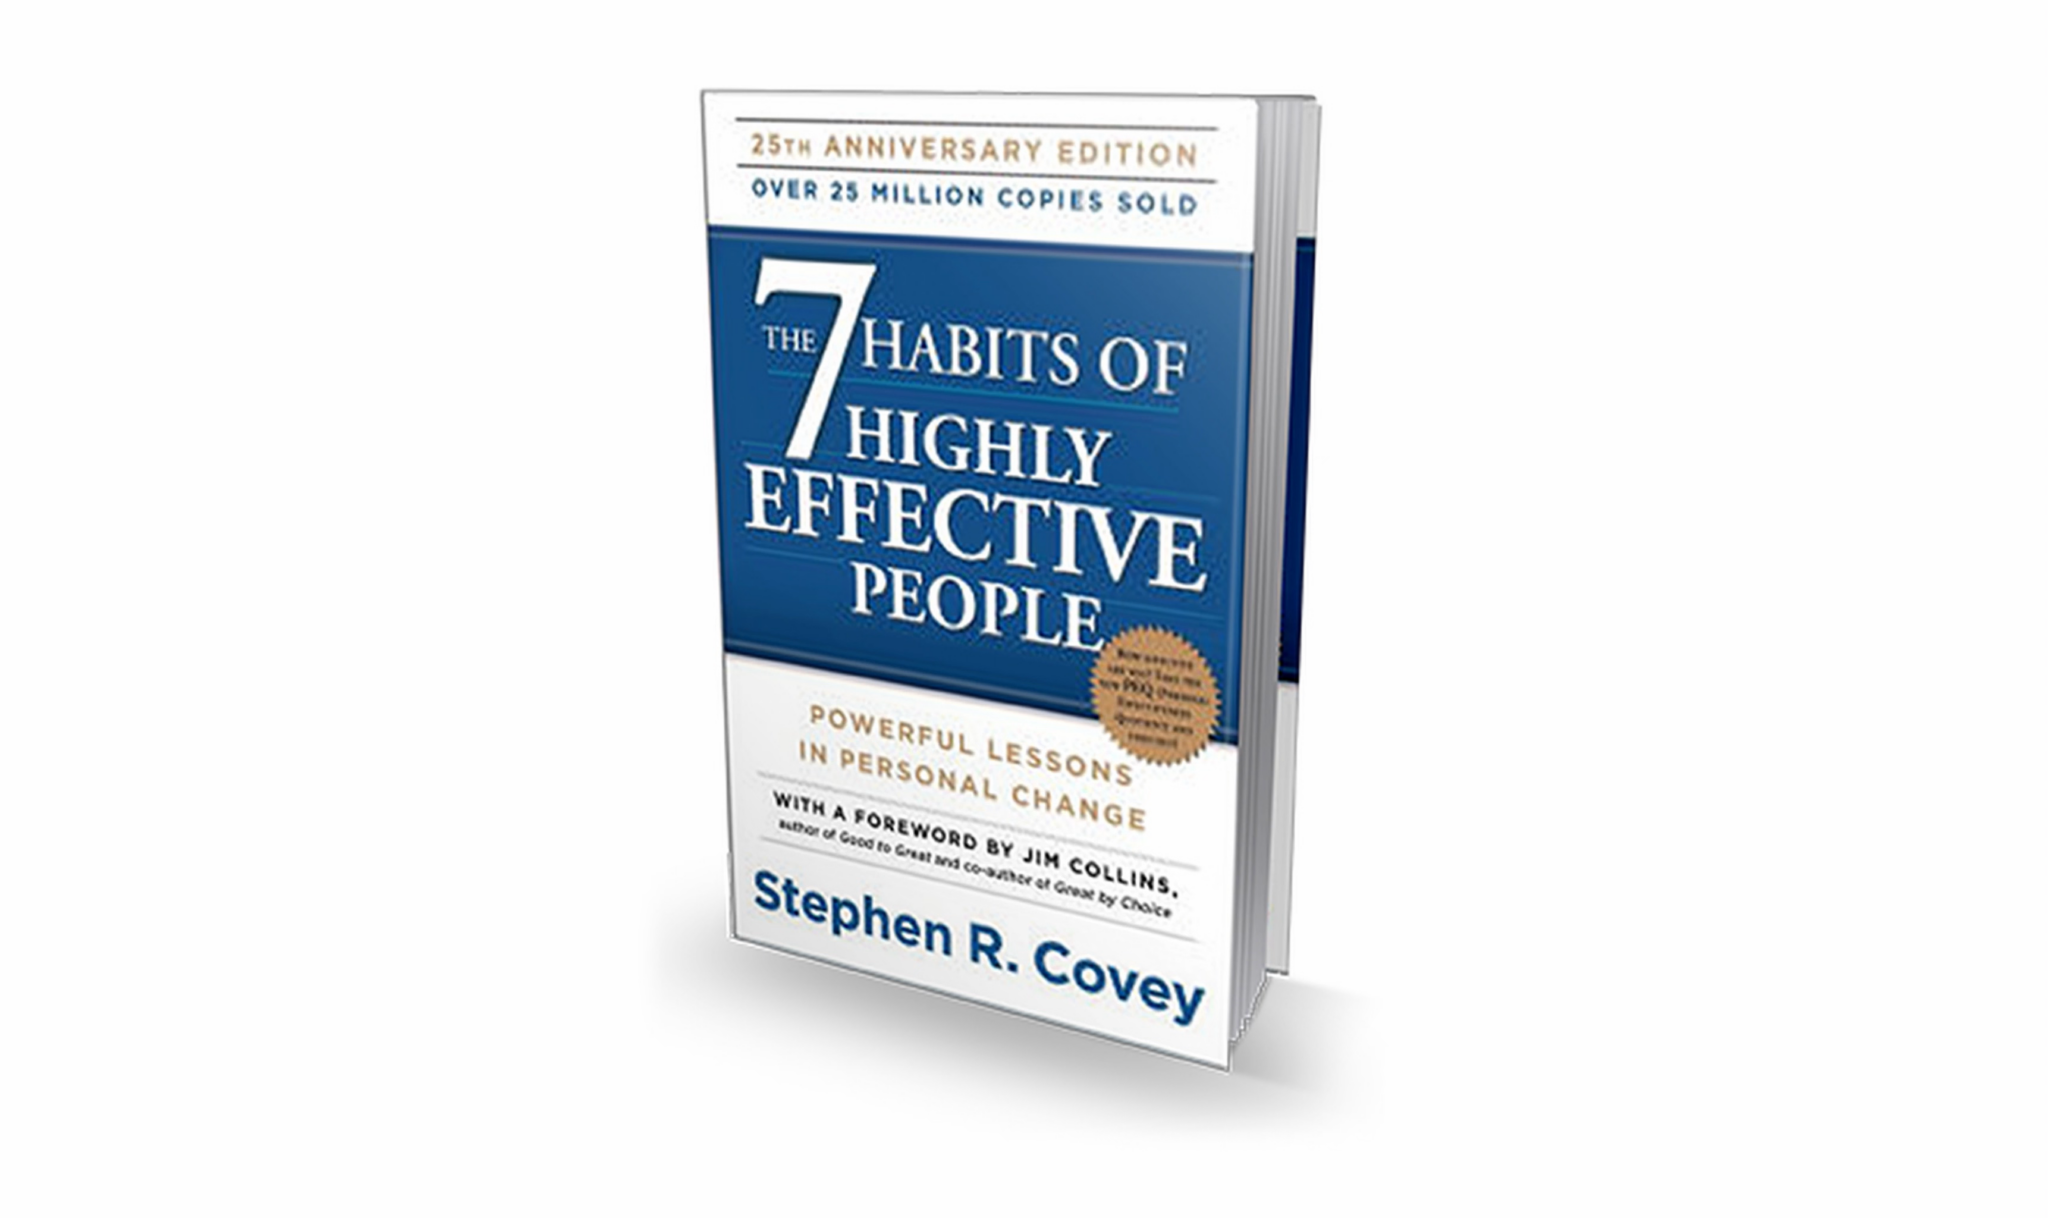 what are stephen r. covey 7 habits of highly effective people